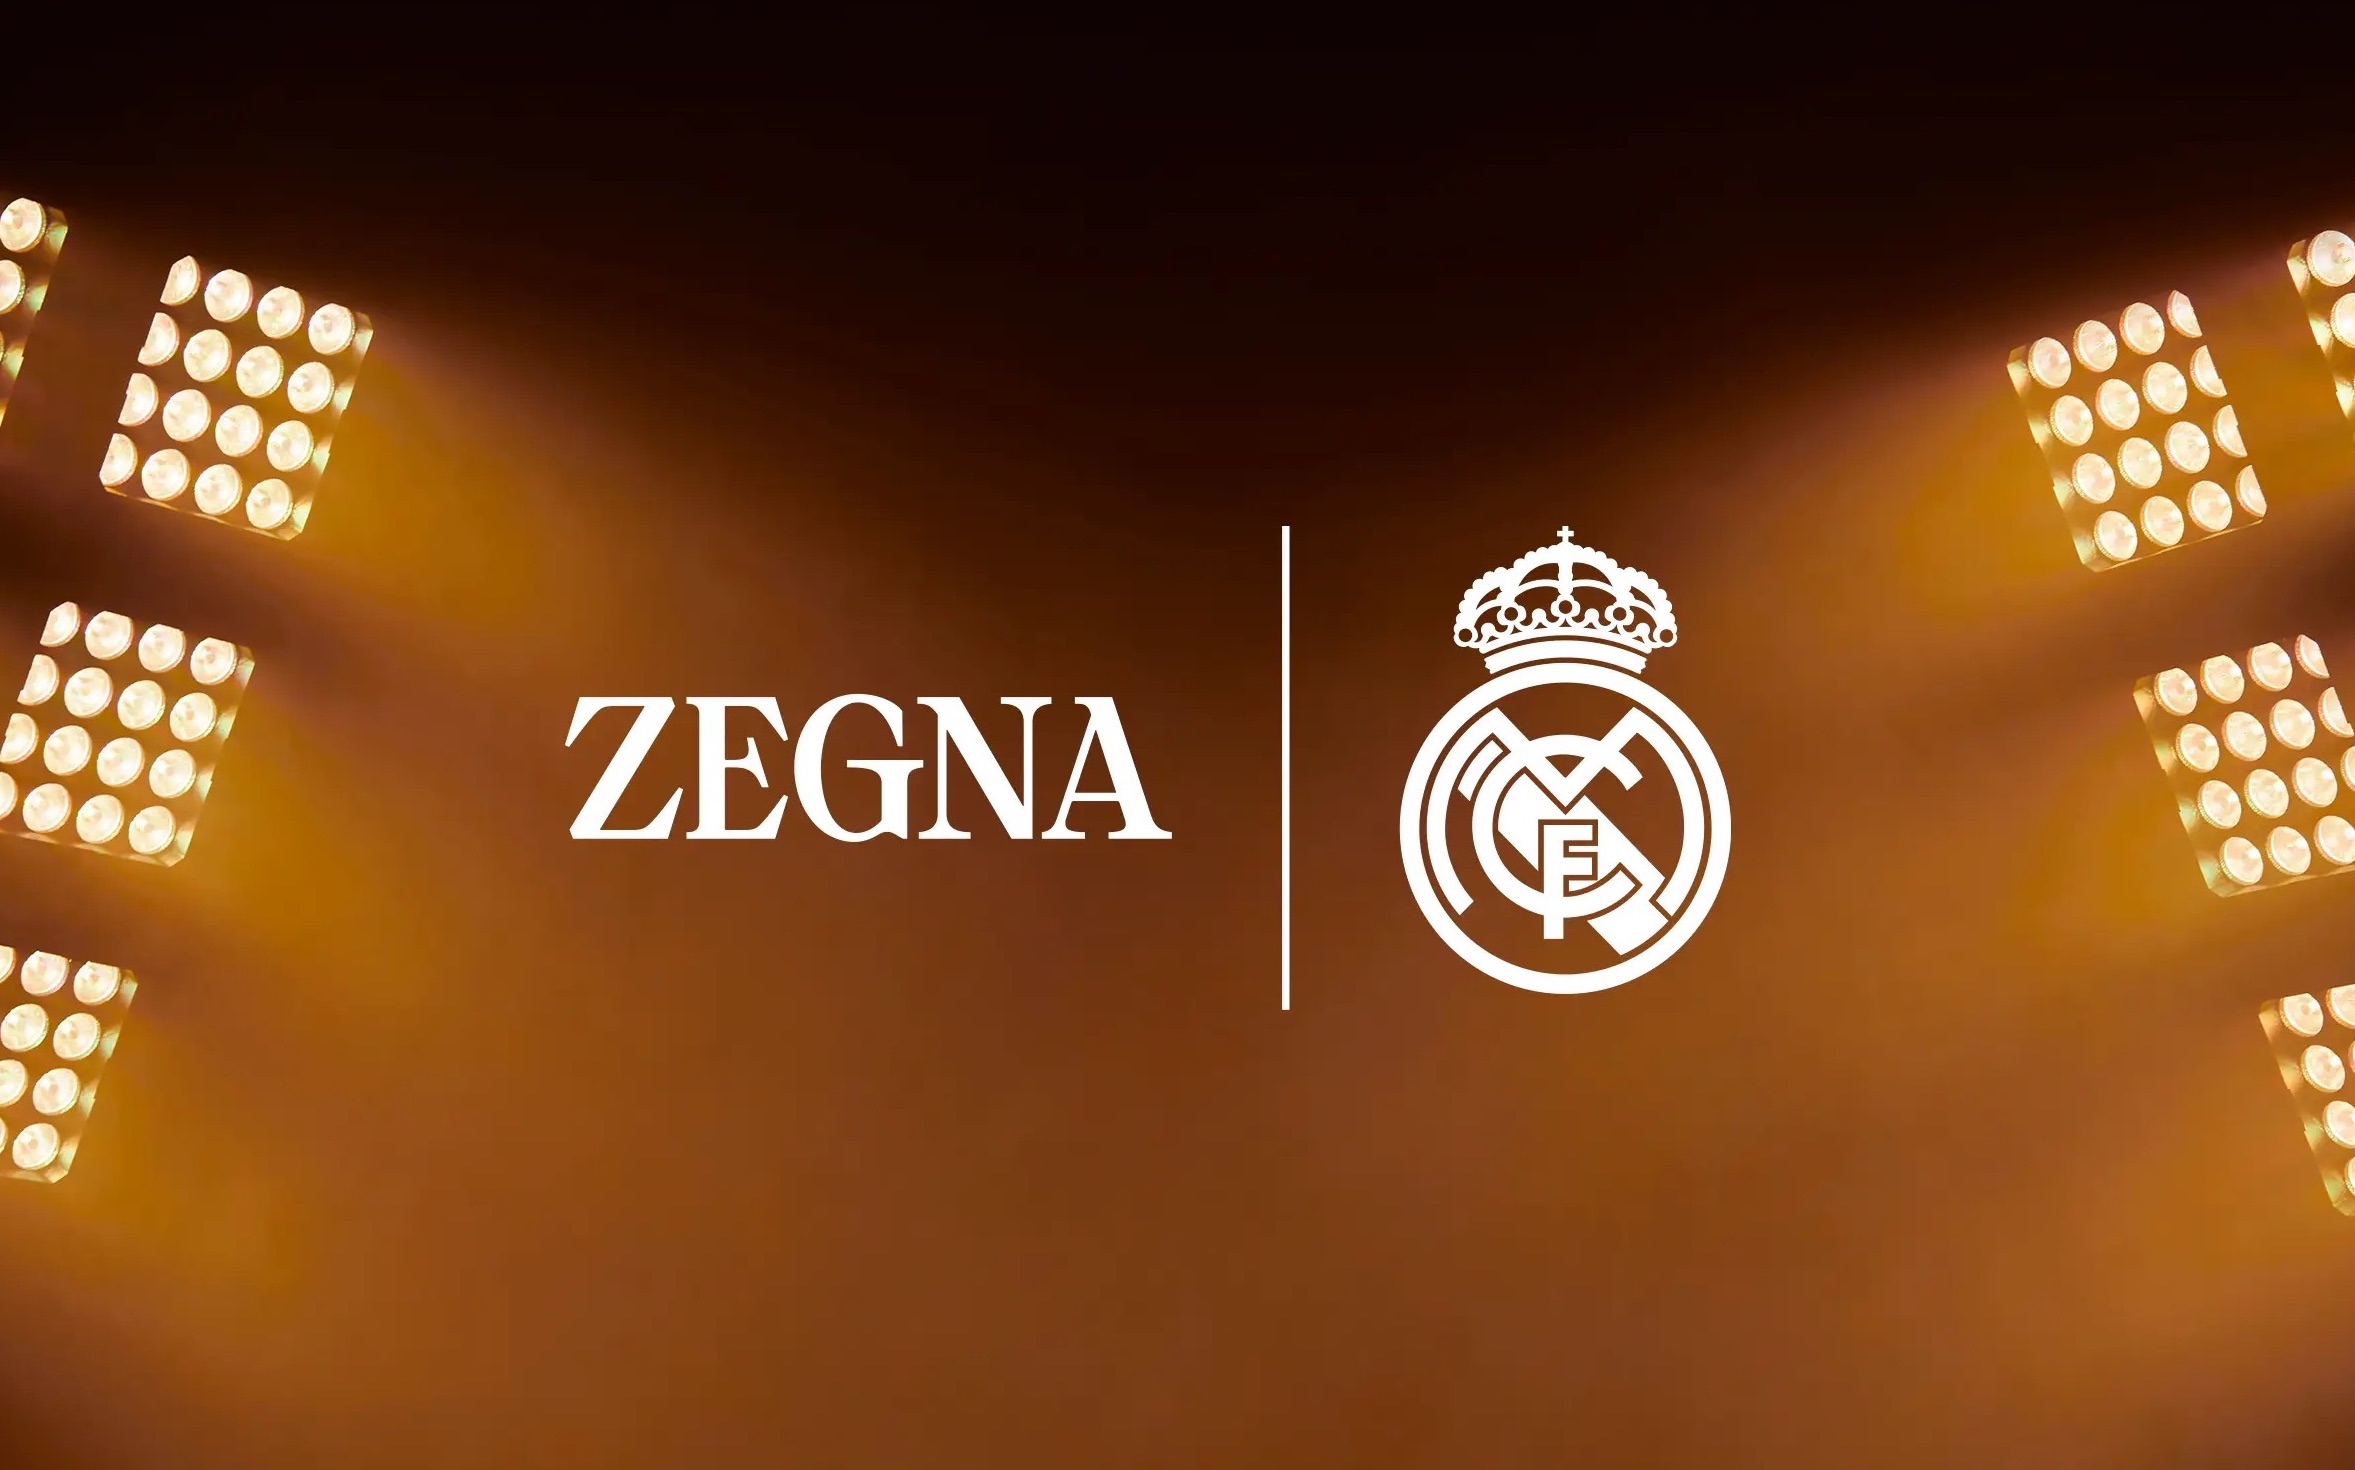 Real Madrid, divise di lusso firmate Zegna 